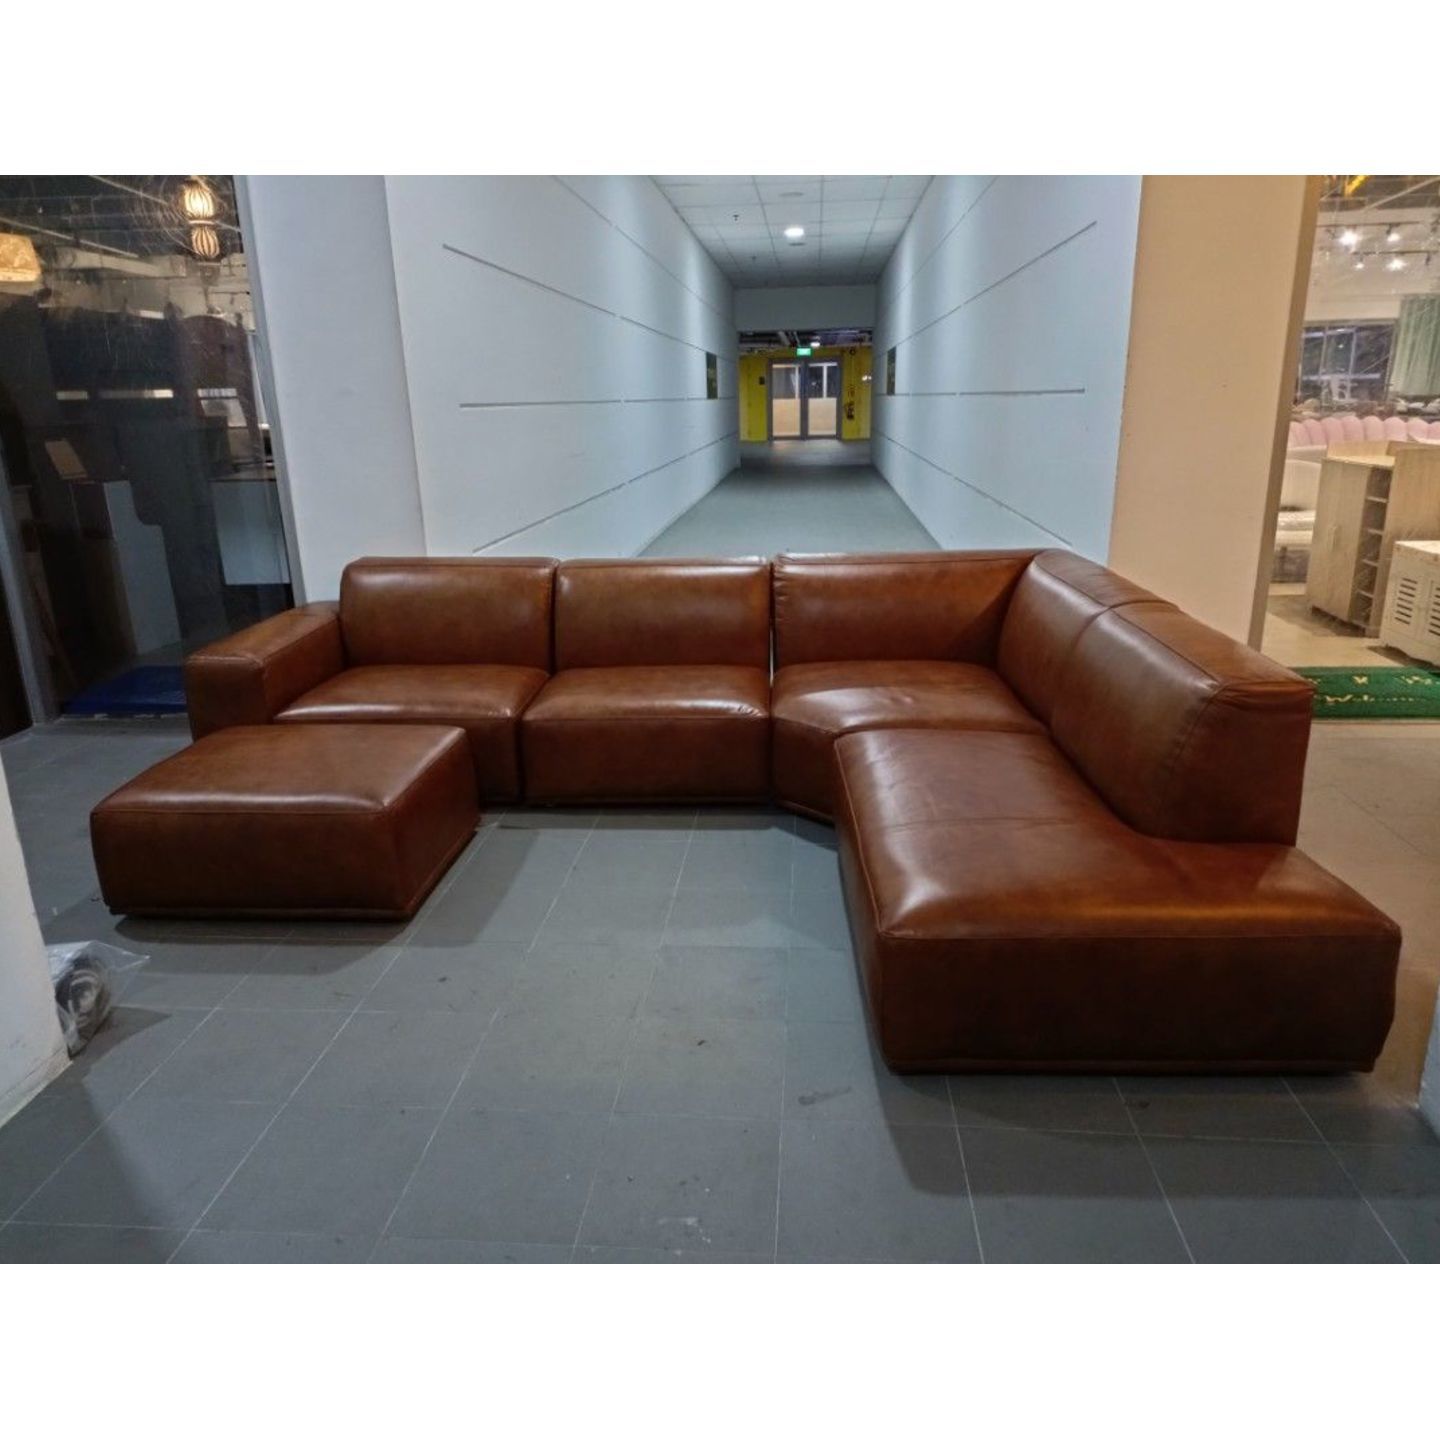 HYEKYO Modular Super Extended Corner Sofa with Ottoman in BISON Brown Genuine Leather